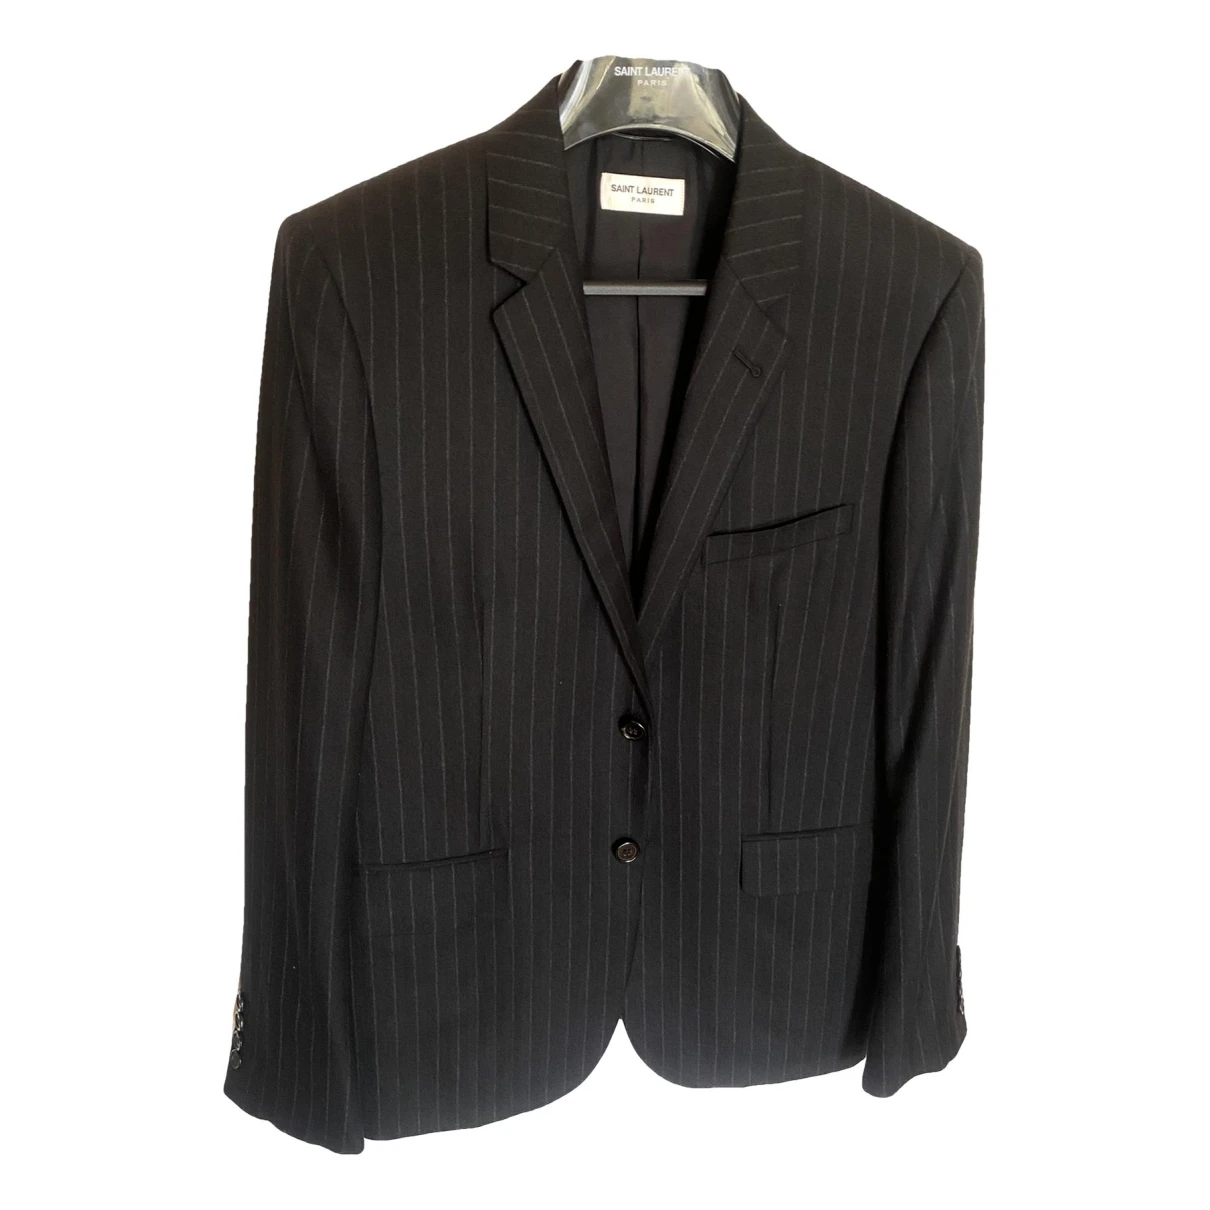 clothing Saint Laurent suits for Male Cashmere XL International. Used condition